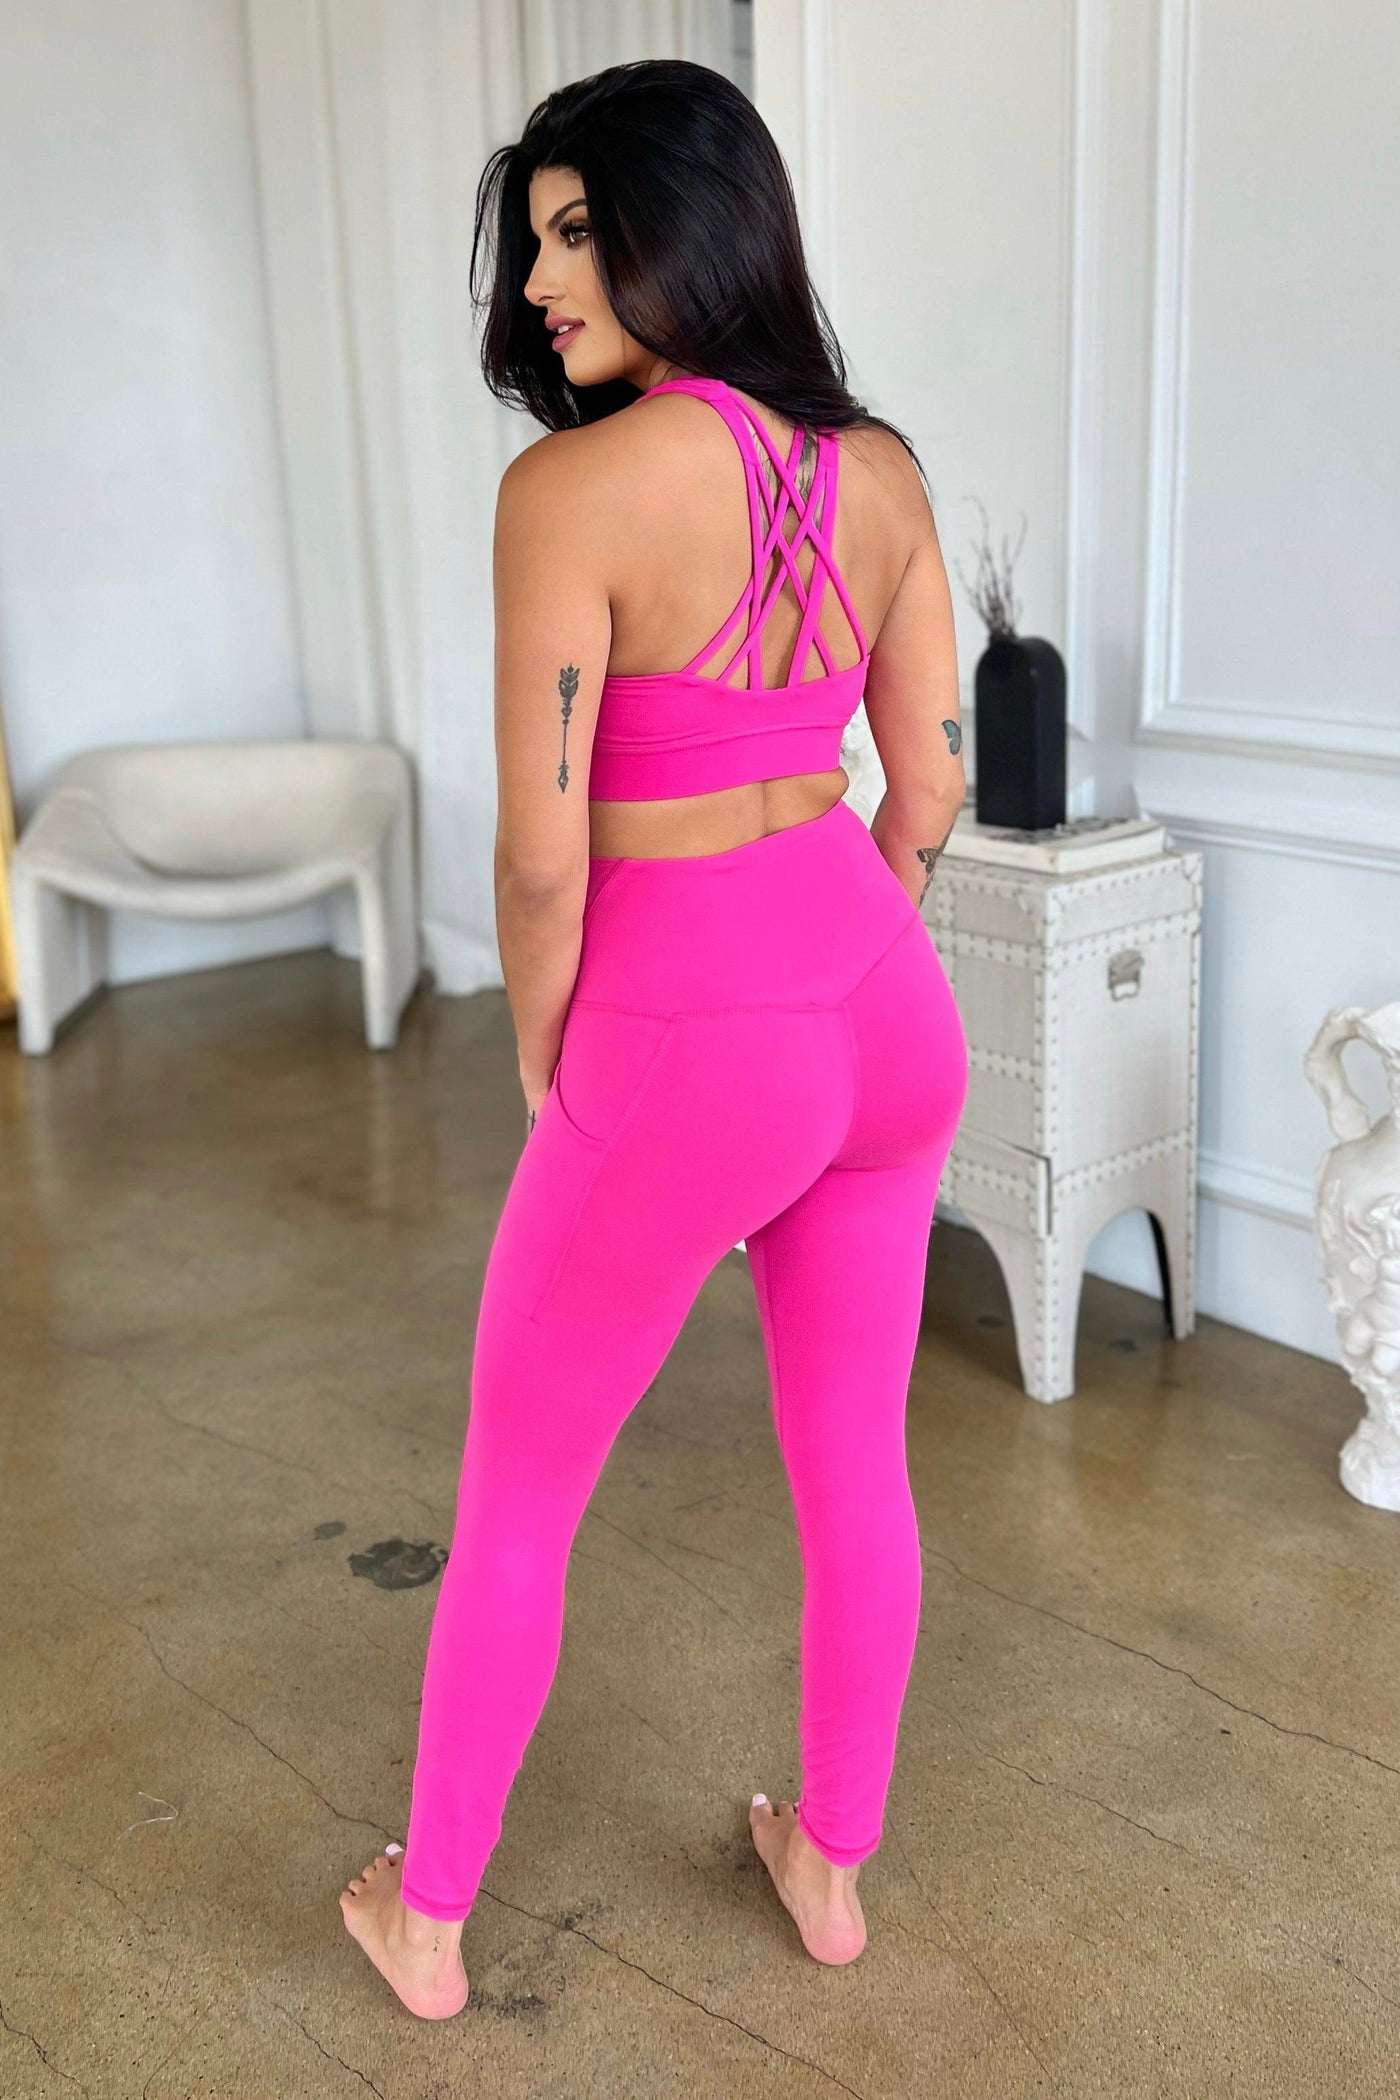 SONIC PINK SPORTS BRA (PLUS SIZE AVAILABLE) , LEGGINGS , it’sNOMB. The Label , ACTIVEWEAR, ATHLEISURE, it's nomb the label, ITS NOMB, Its None of My Business, ITSNOMB, ITSNOMBTHELABEL, IT’S NOMB, JESSICA NICKSON, LOUNGE WEAR, LOUNGEWEAR, Maternity Friendly, PINK ATHLEISURE, pink sports bra, SPORTS TANK, SPORTSBRA, SPORTTANK, WORK OUT, WORKOUT, YOGA , It's NOMB , itsnomb.com